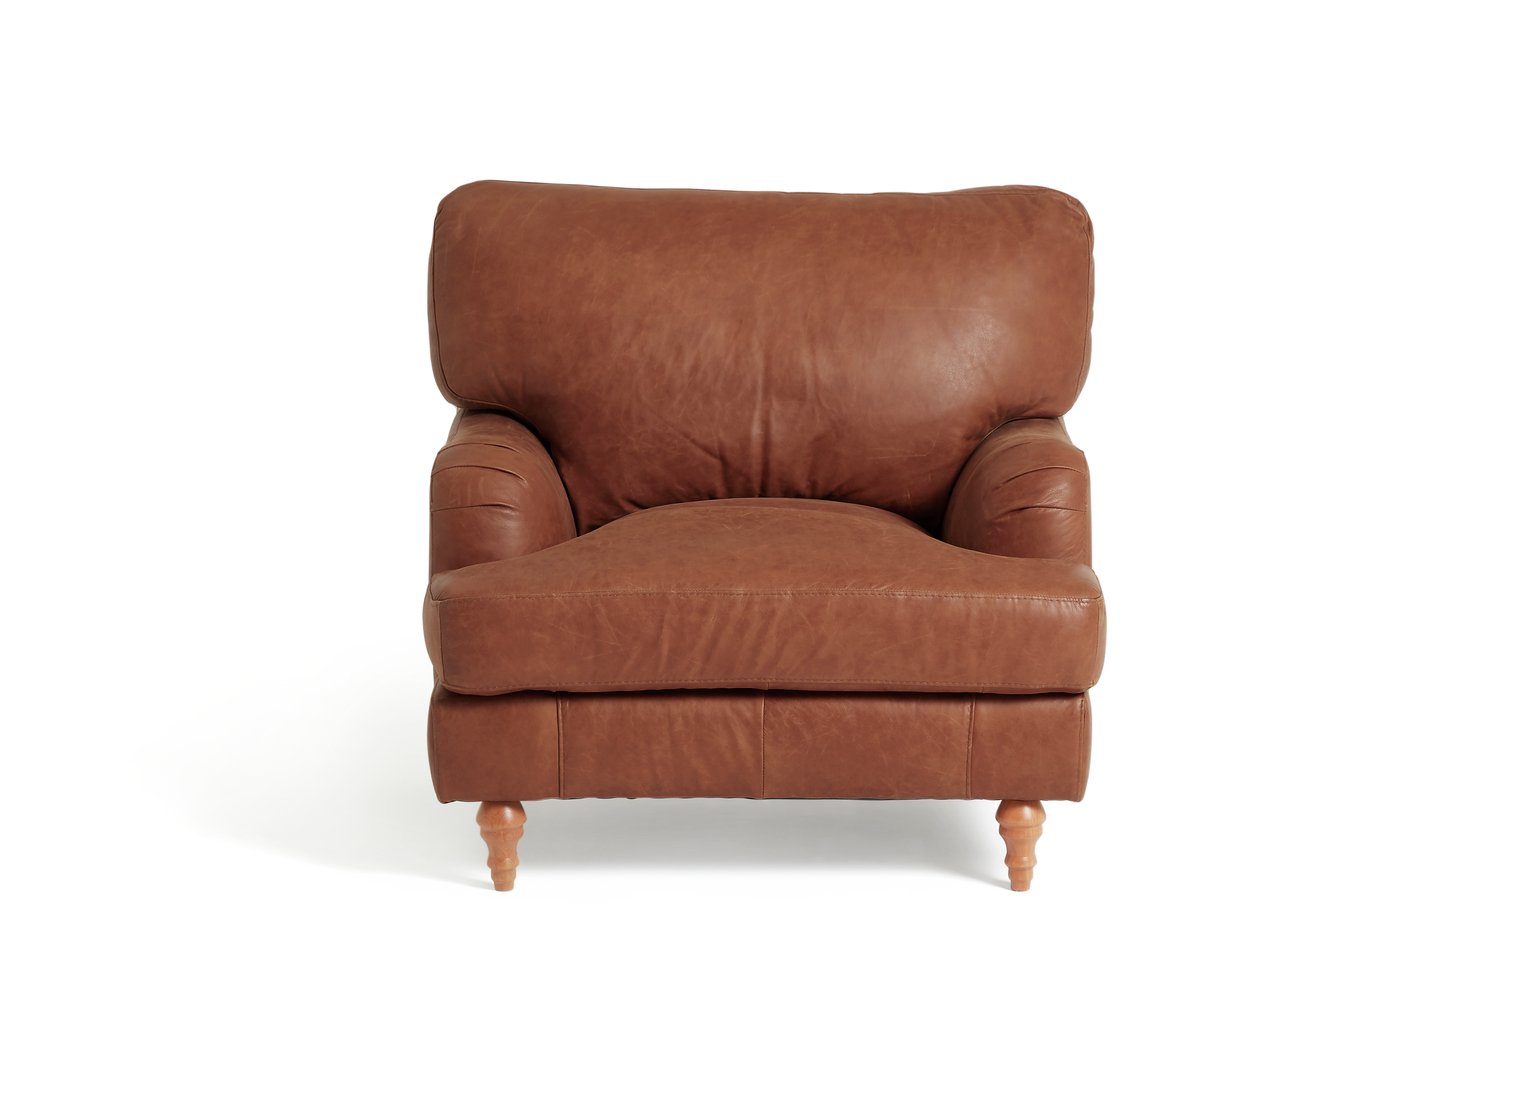 Argos Home - Livingston - Leather Chair Reviews